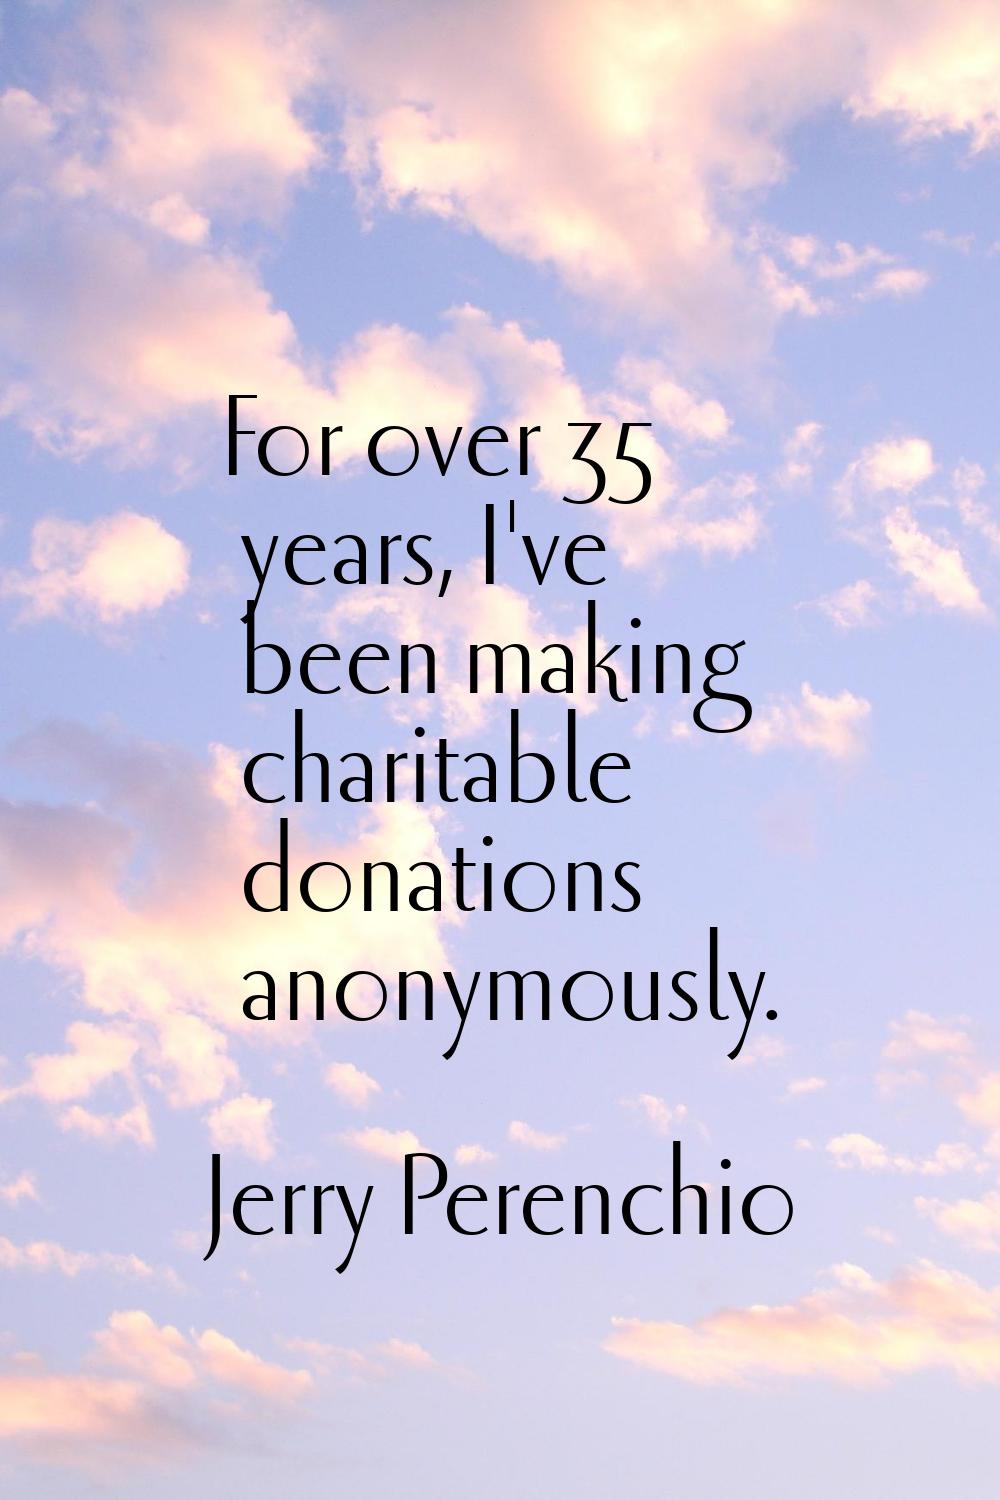 For over 35 years, I've been making charitable donations anonymously.